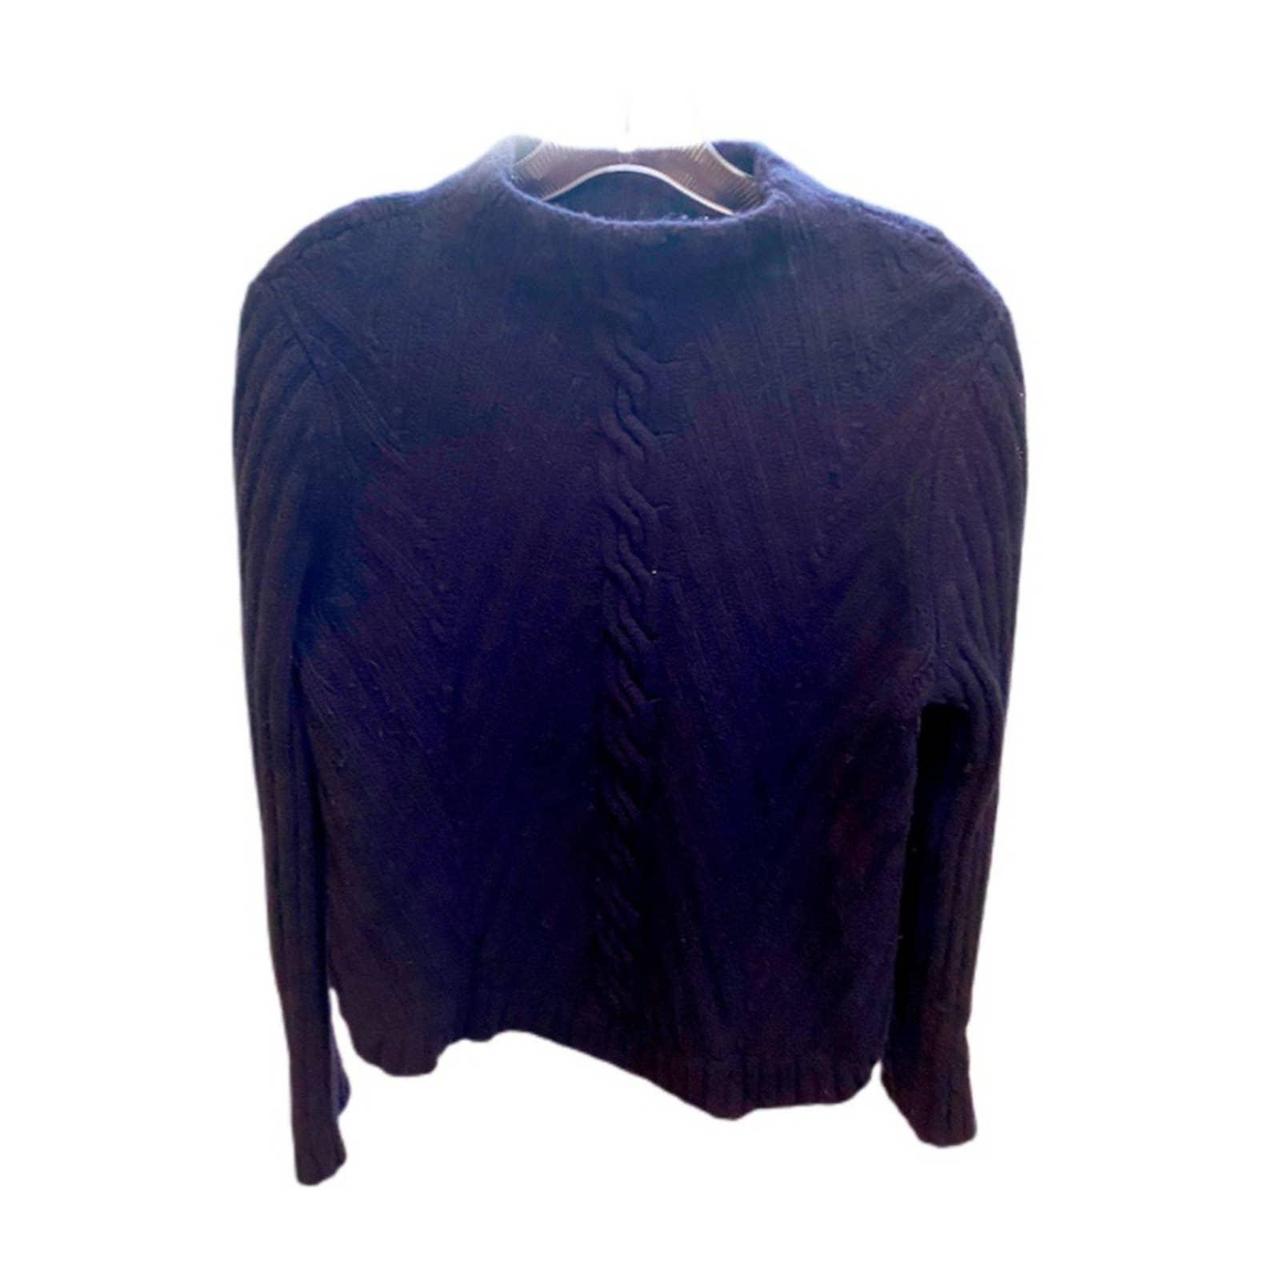 Product Image 2 - Cable Knit Wool Sweater

East coast